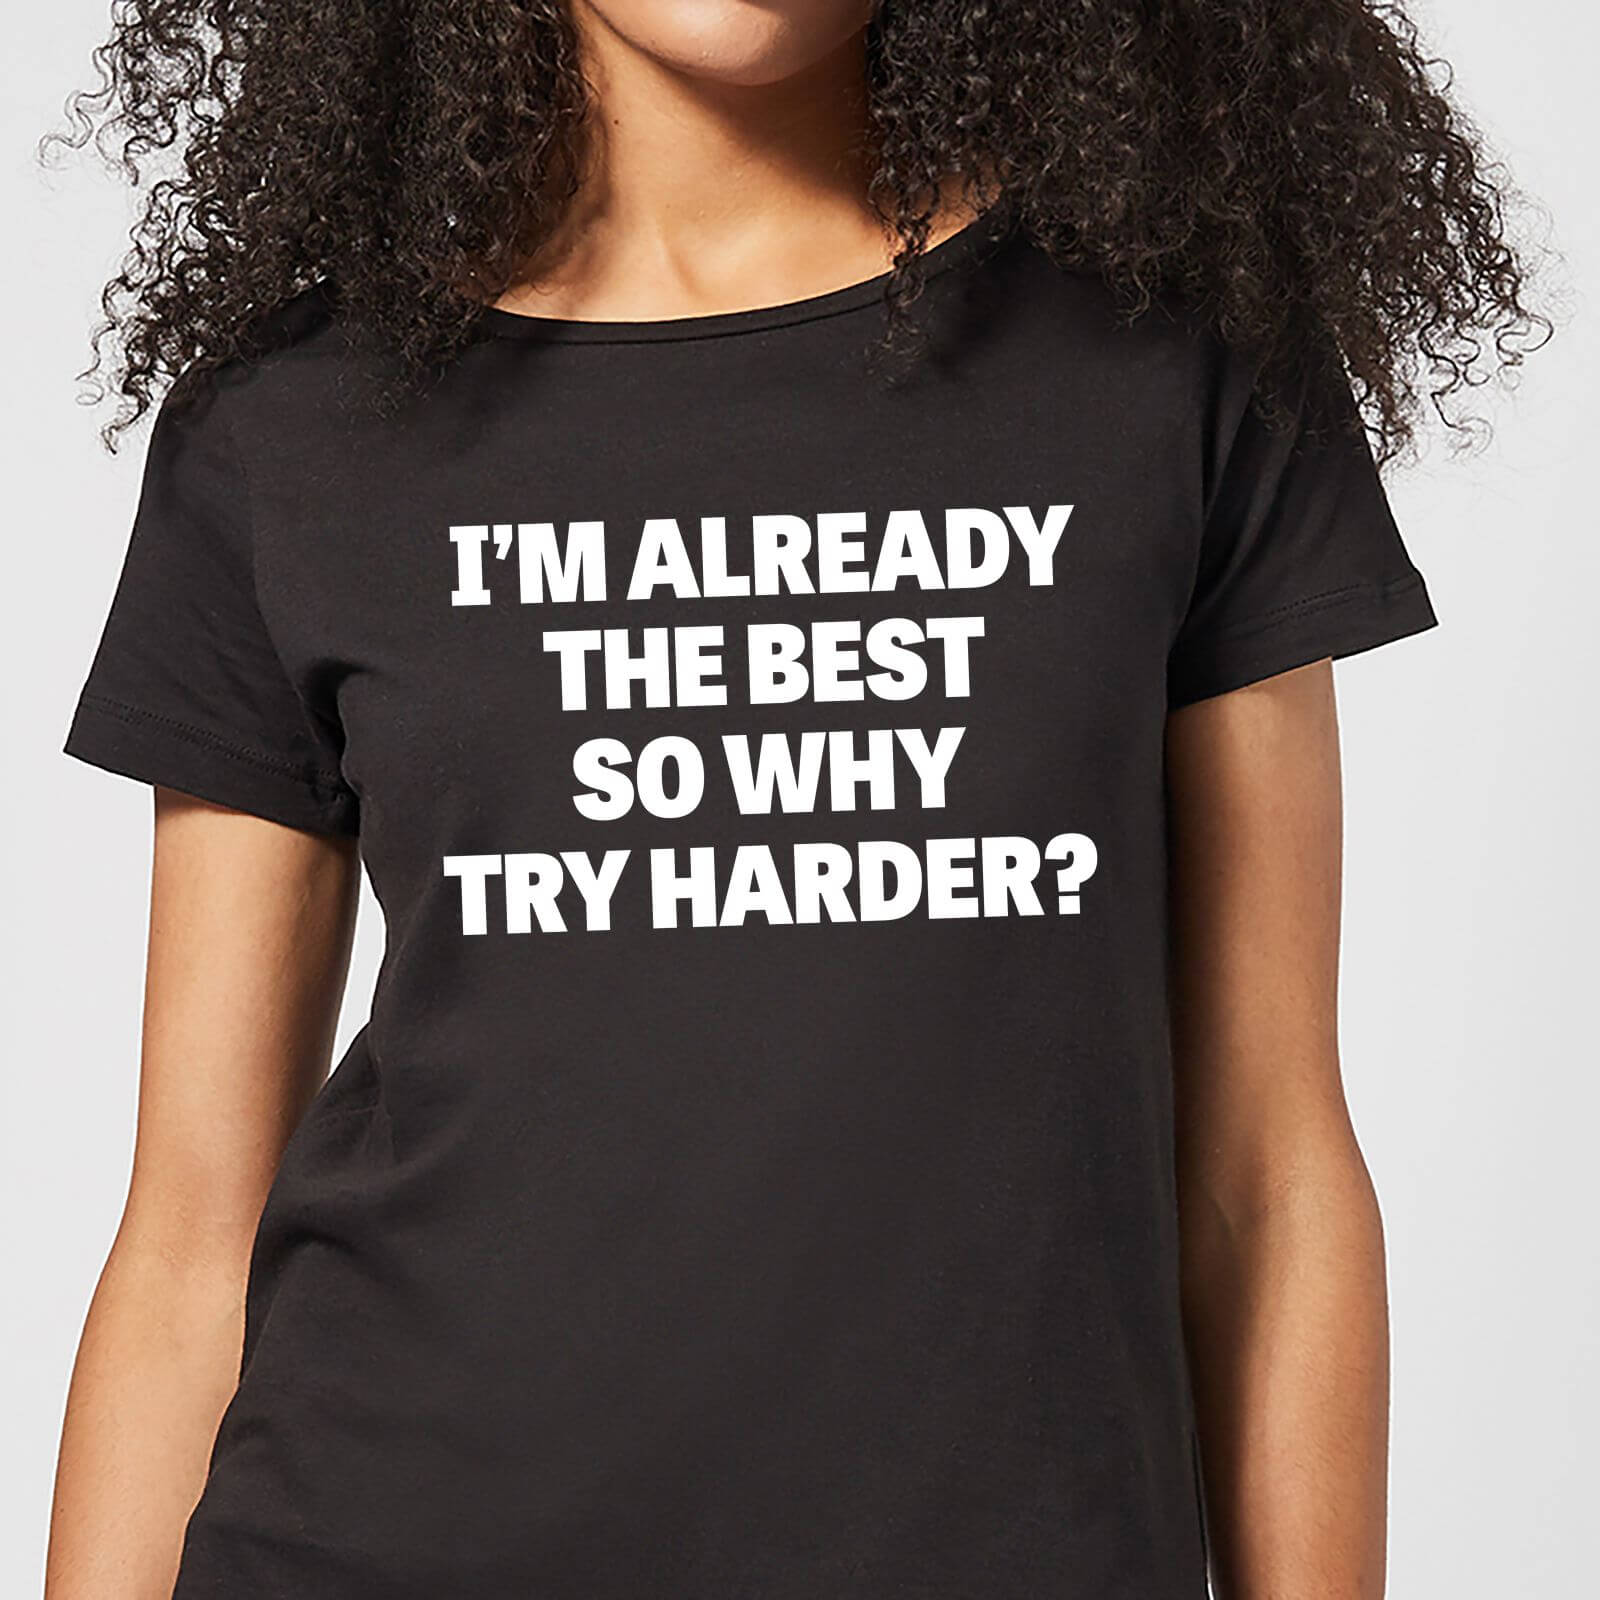 By Iwoot Im already the best so why try harder women's t-shirt - black - 5xl - black